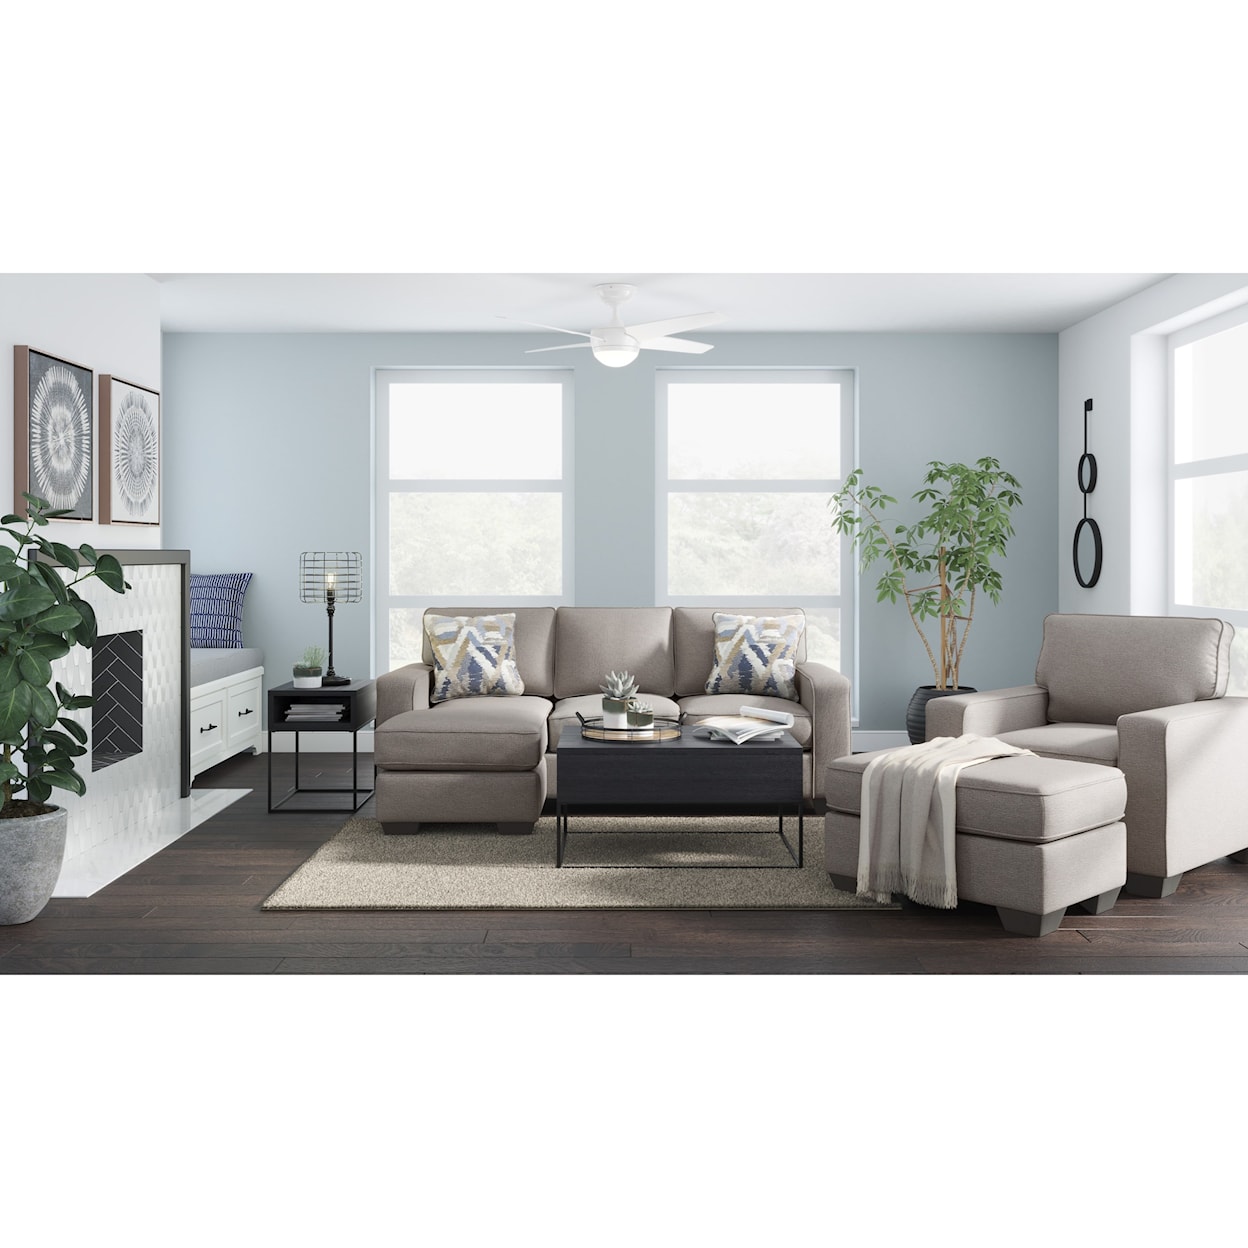 Signature Design Greaves Living Room Group